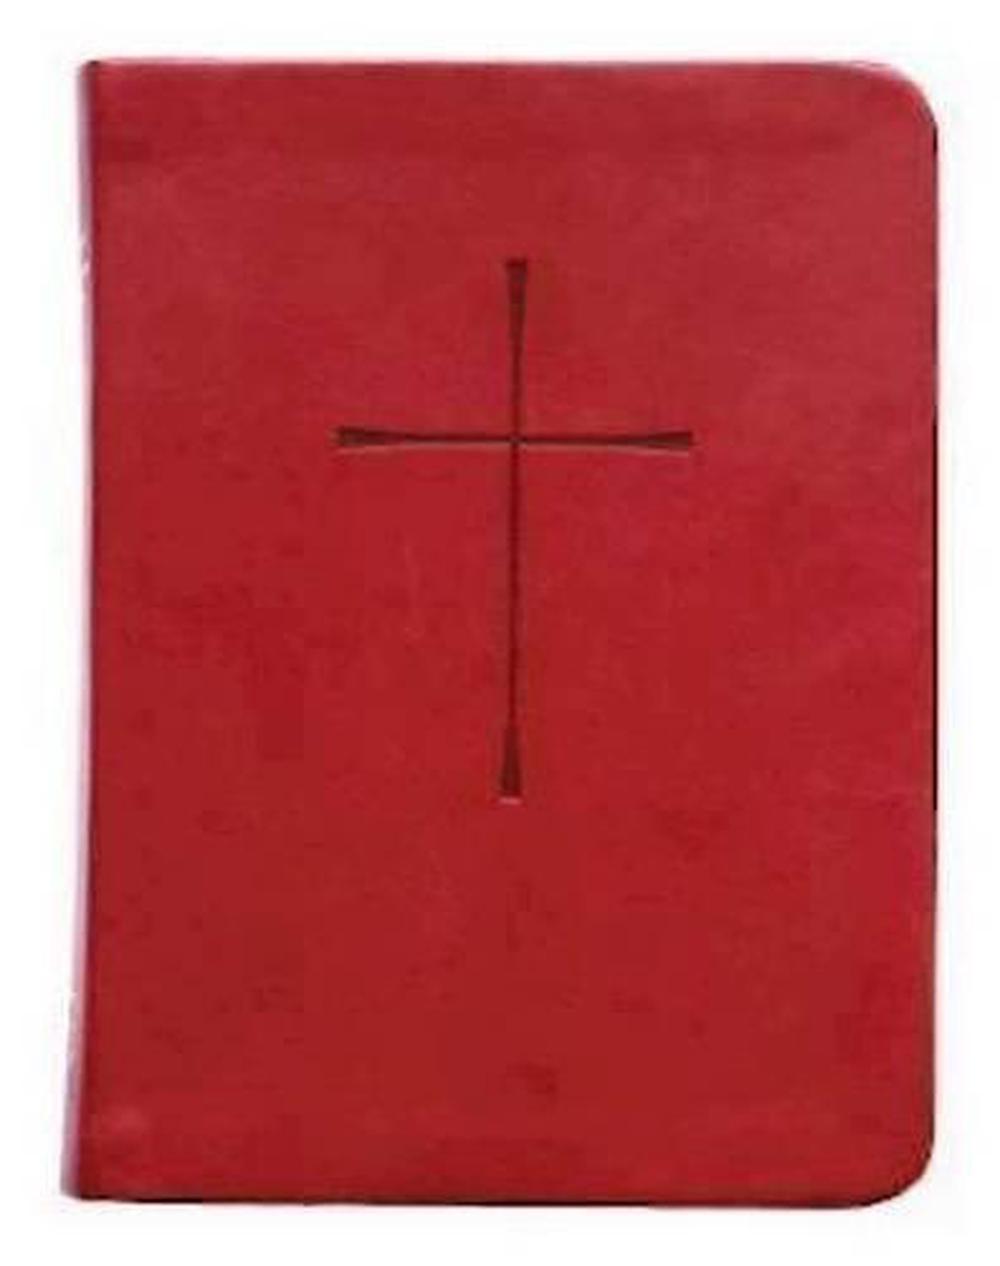 Christian word ministries free red prayer book